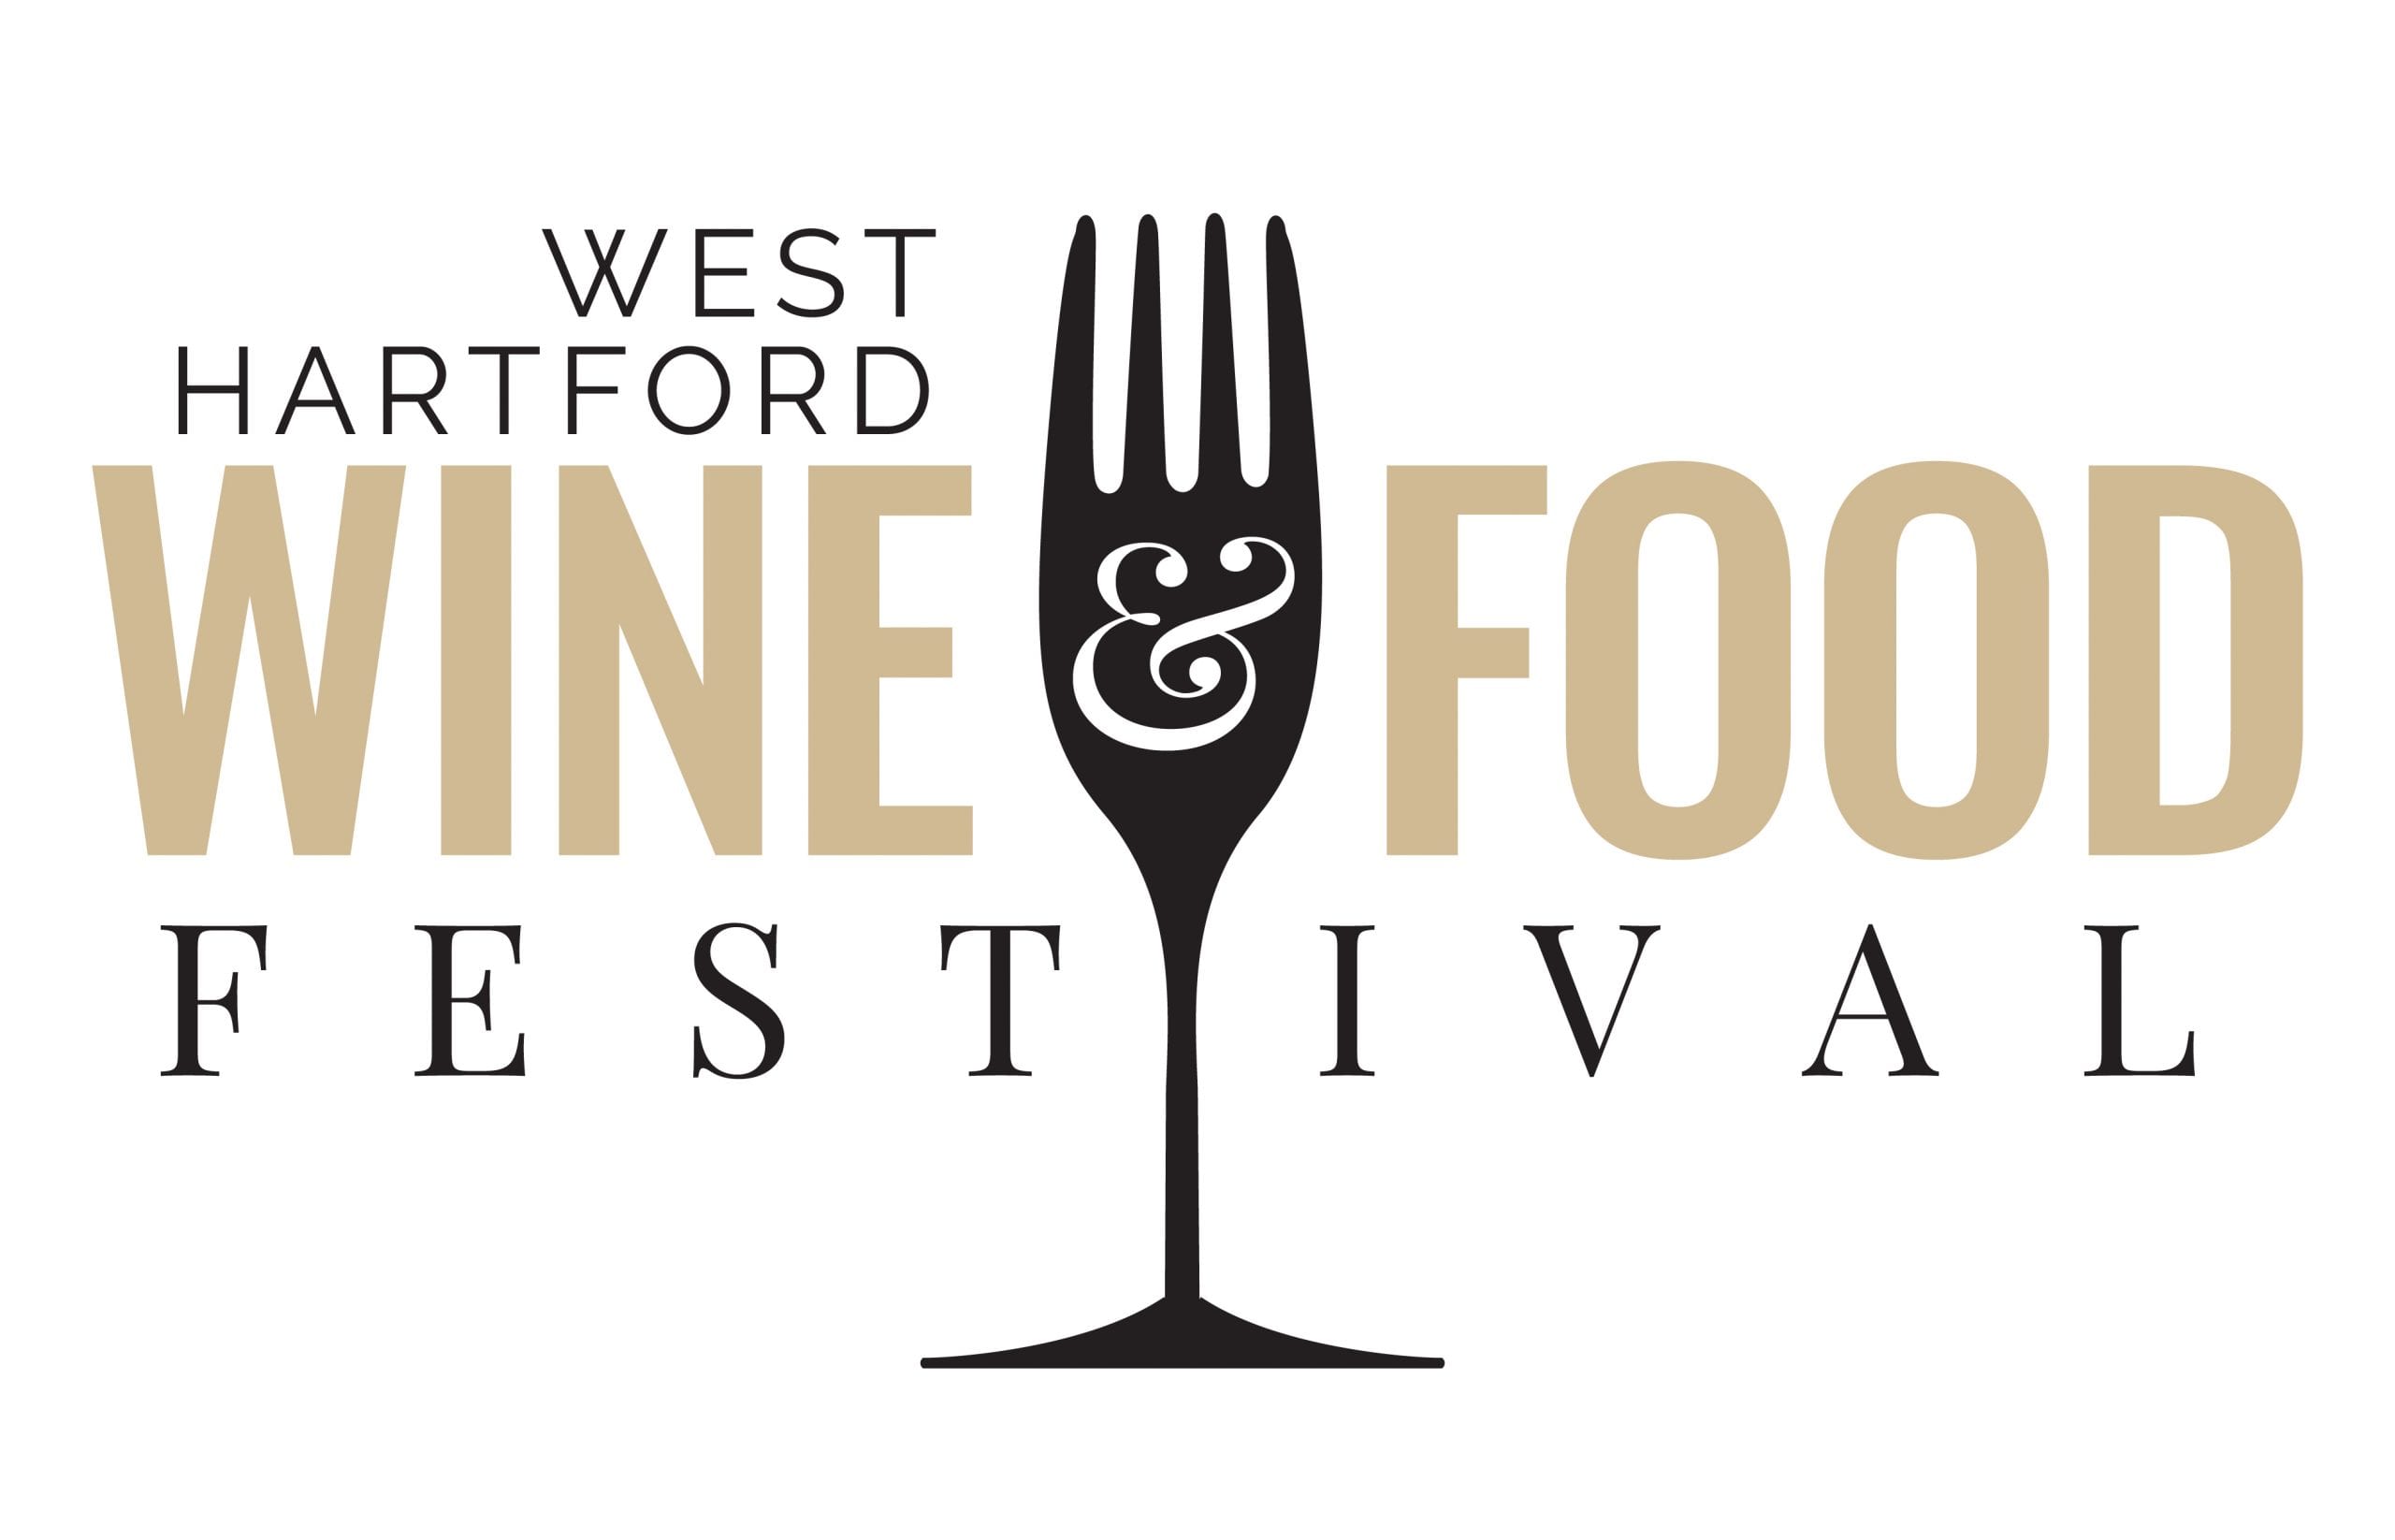 Wine, Food & West Hartford a Perfect Combo for Inaugural Festival We